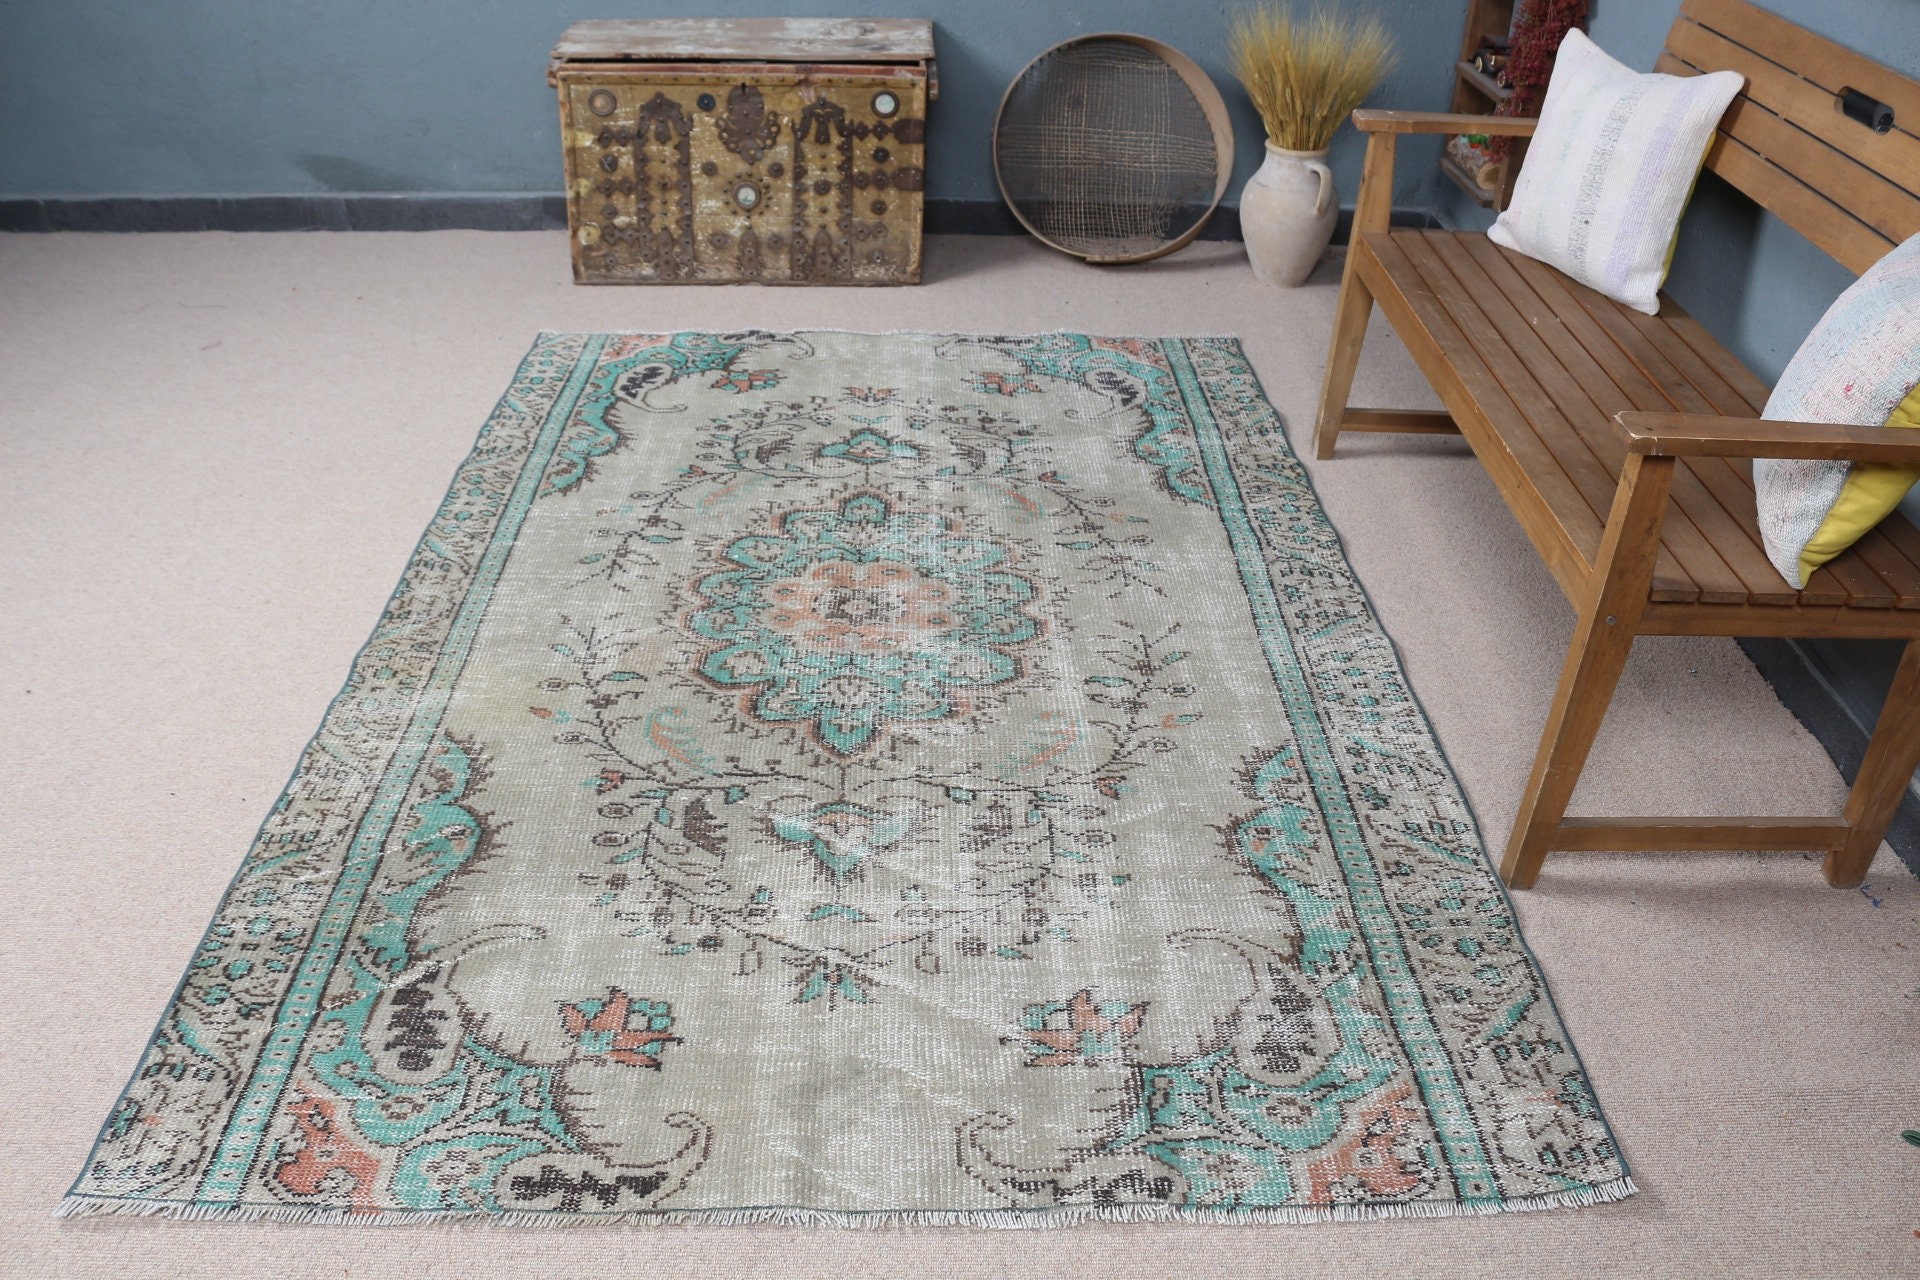 Green  5x7.3 ft Area Rugs, Vintage Rugs, Dining Room Rug, Rugs for Area, Turkish Rugs, Moroccan Rug, Turkey Rug